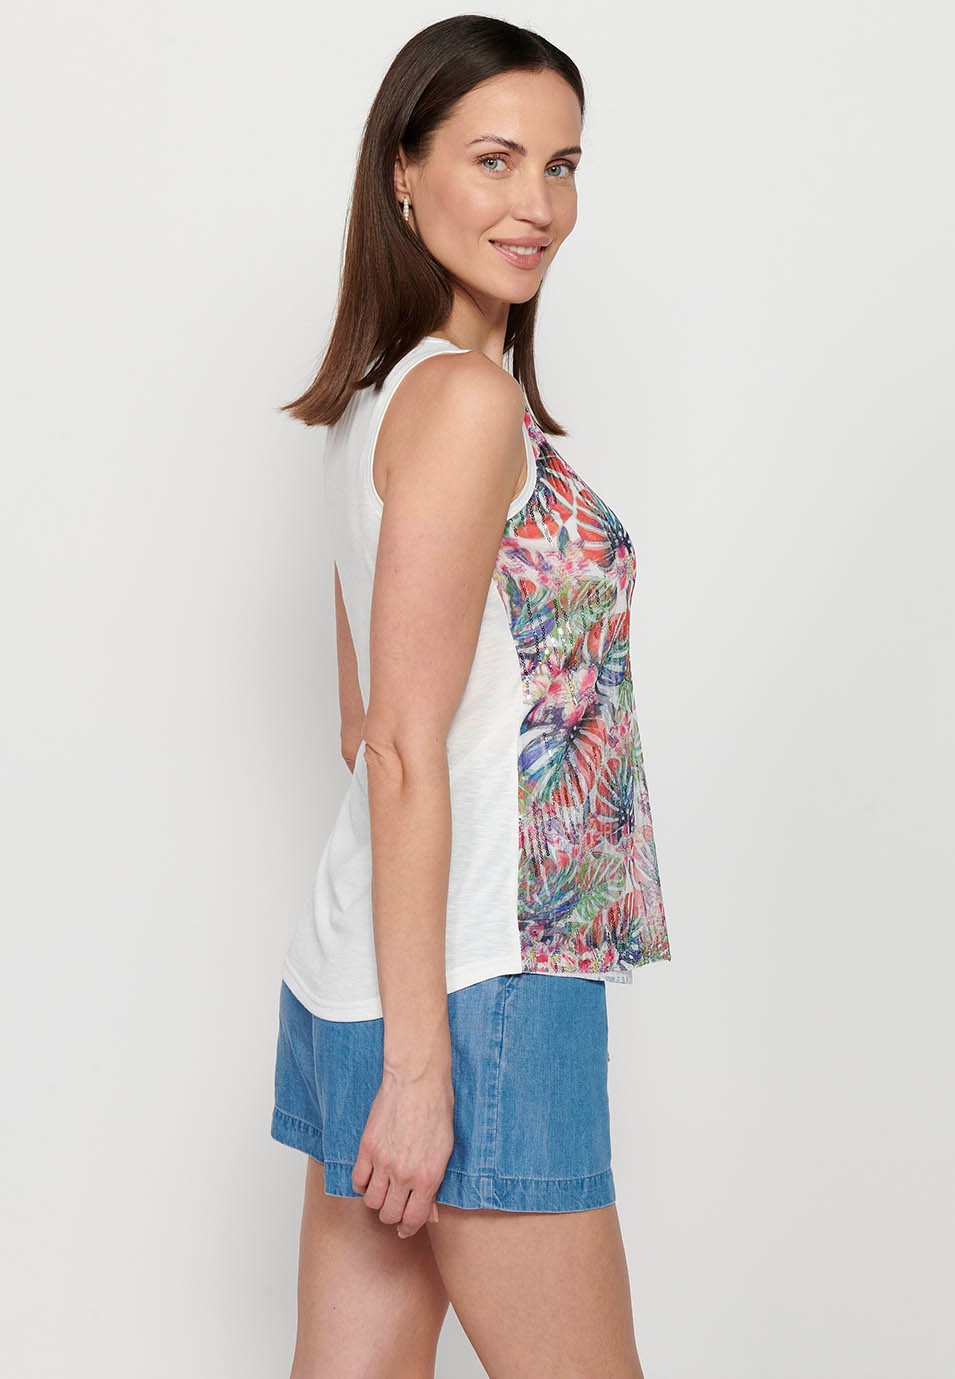 Tank top, round neckline, floral print and sequins, multicolor for women